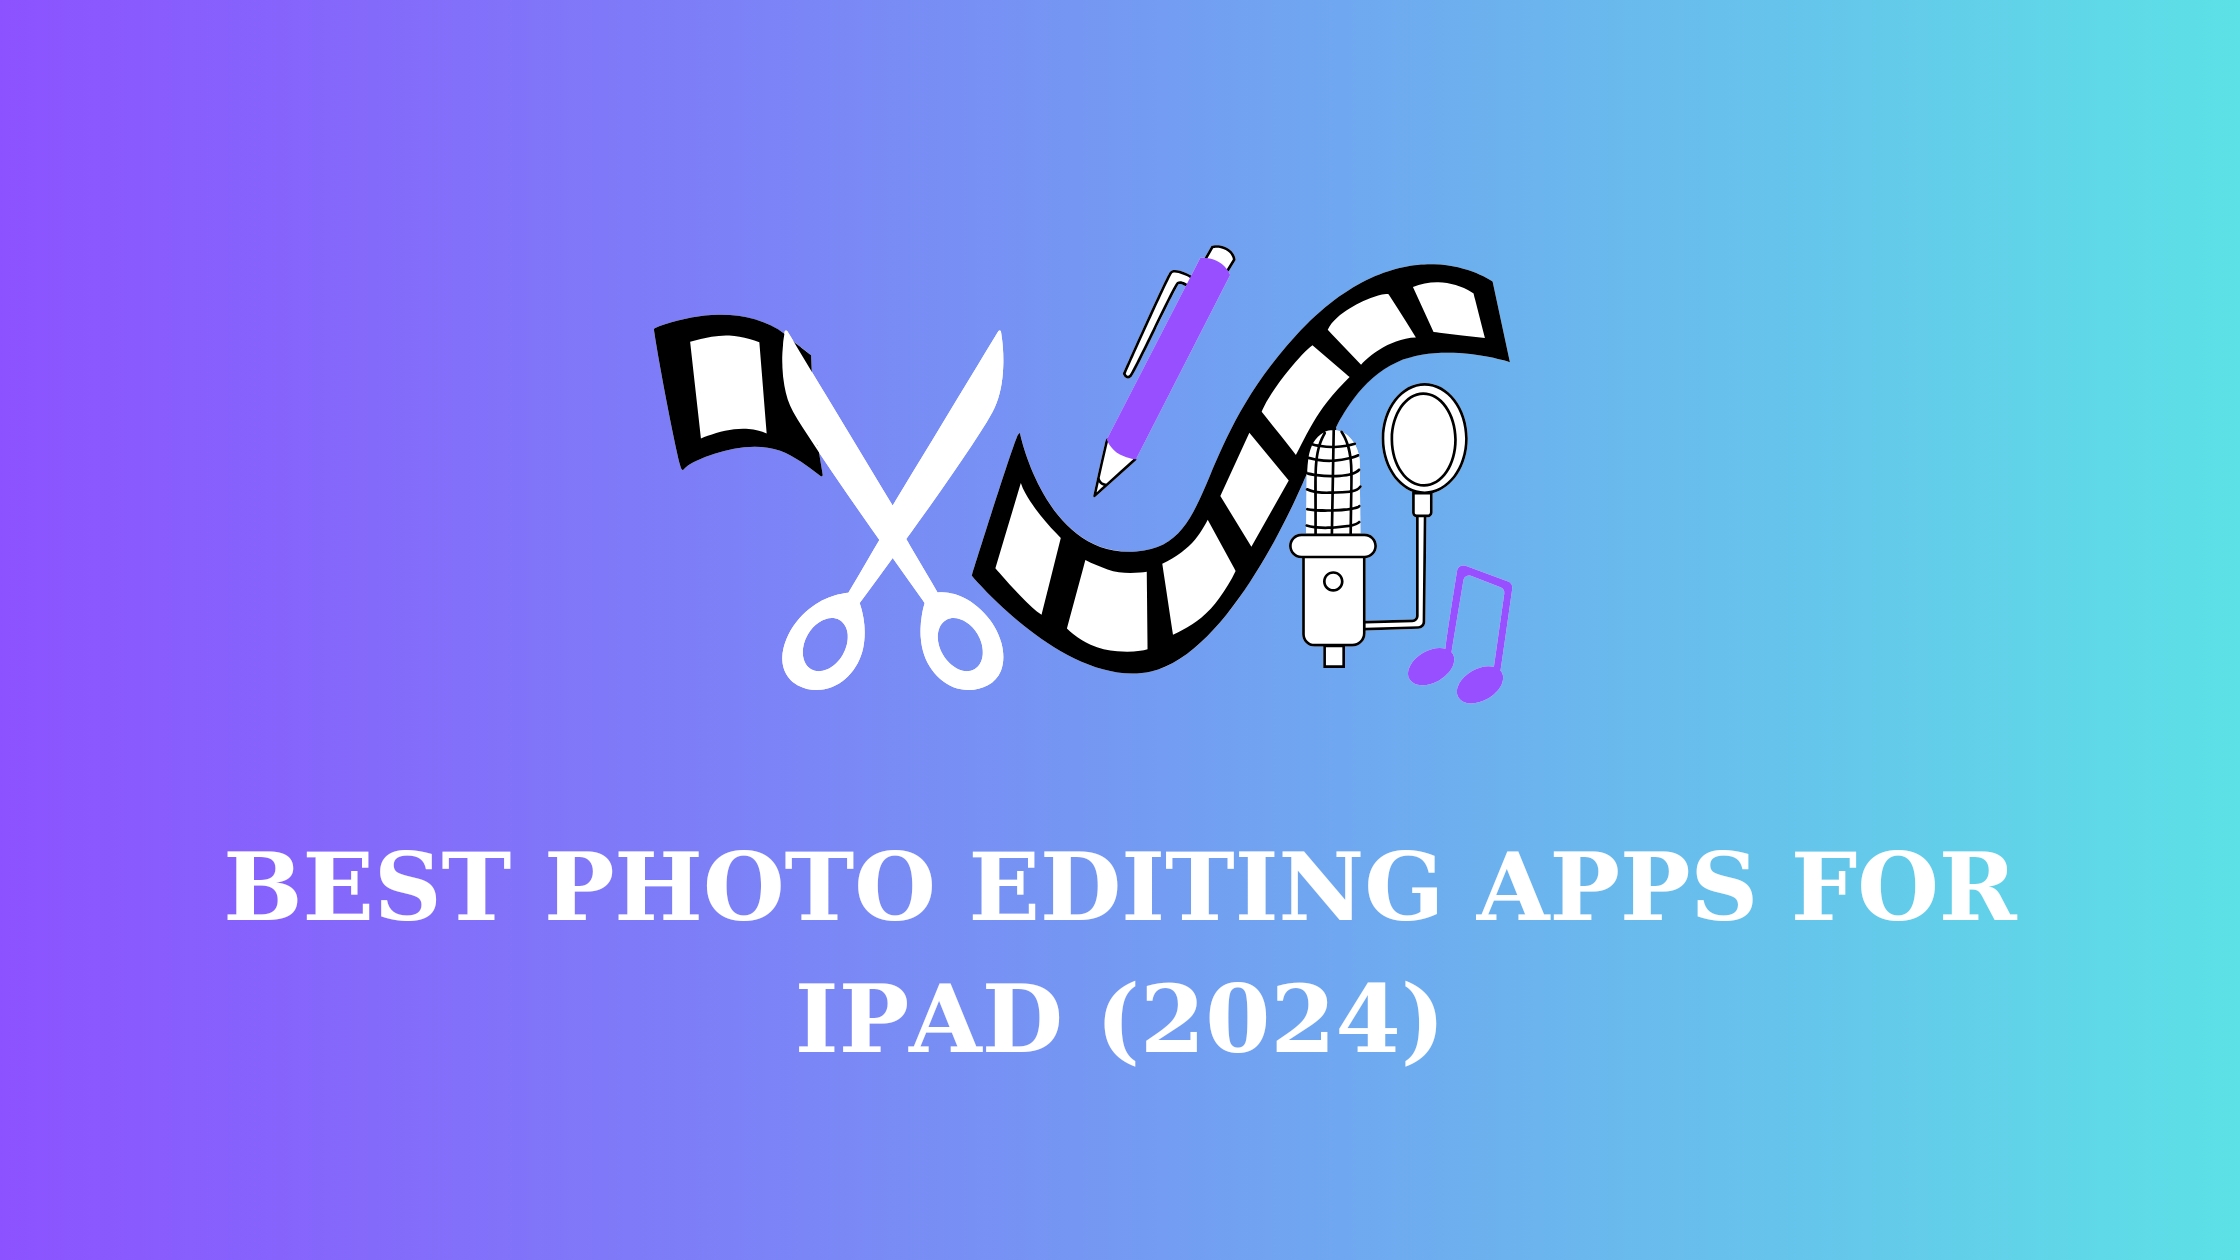 Best photo editing apps for iPad